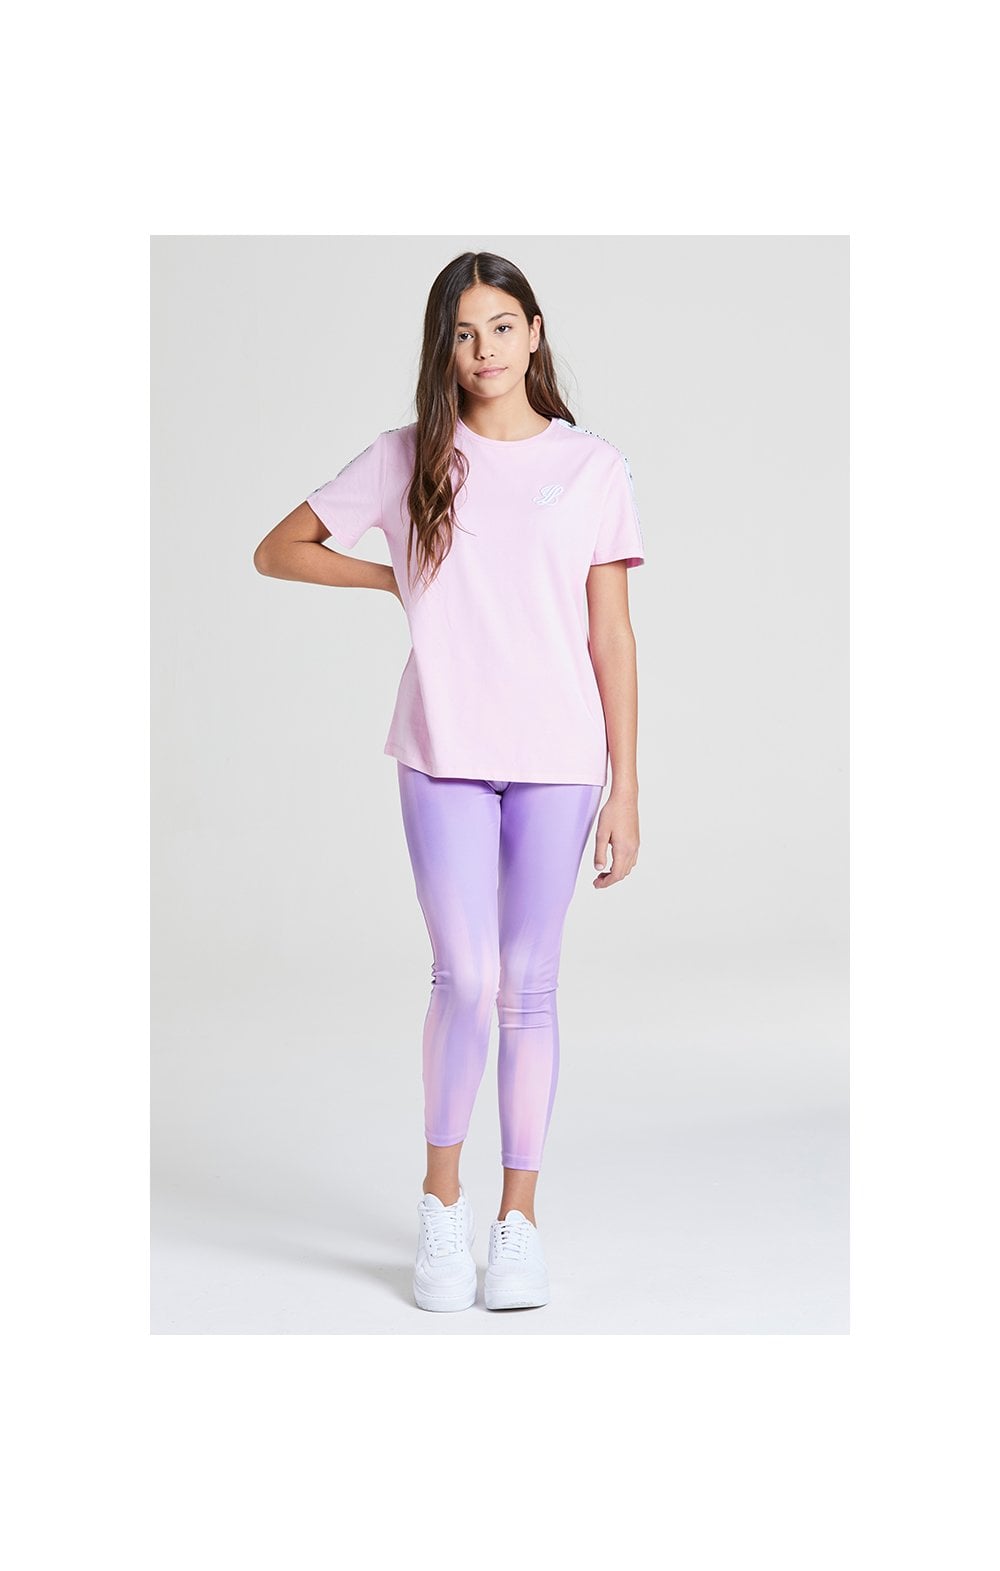 Illusive London BF Fit Taped Tee - Pink (2)